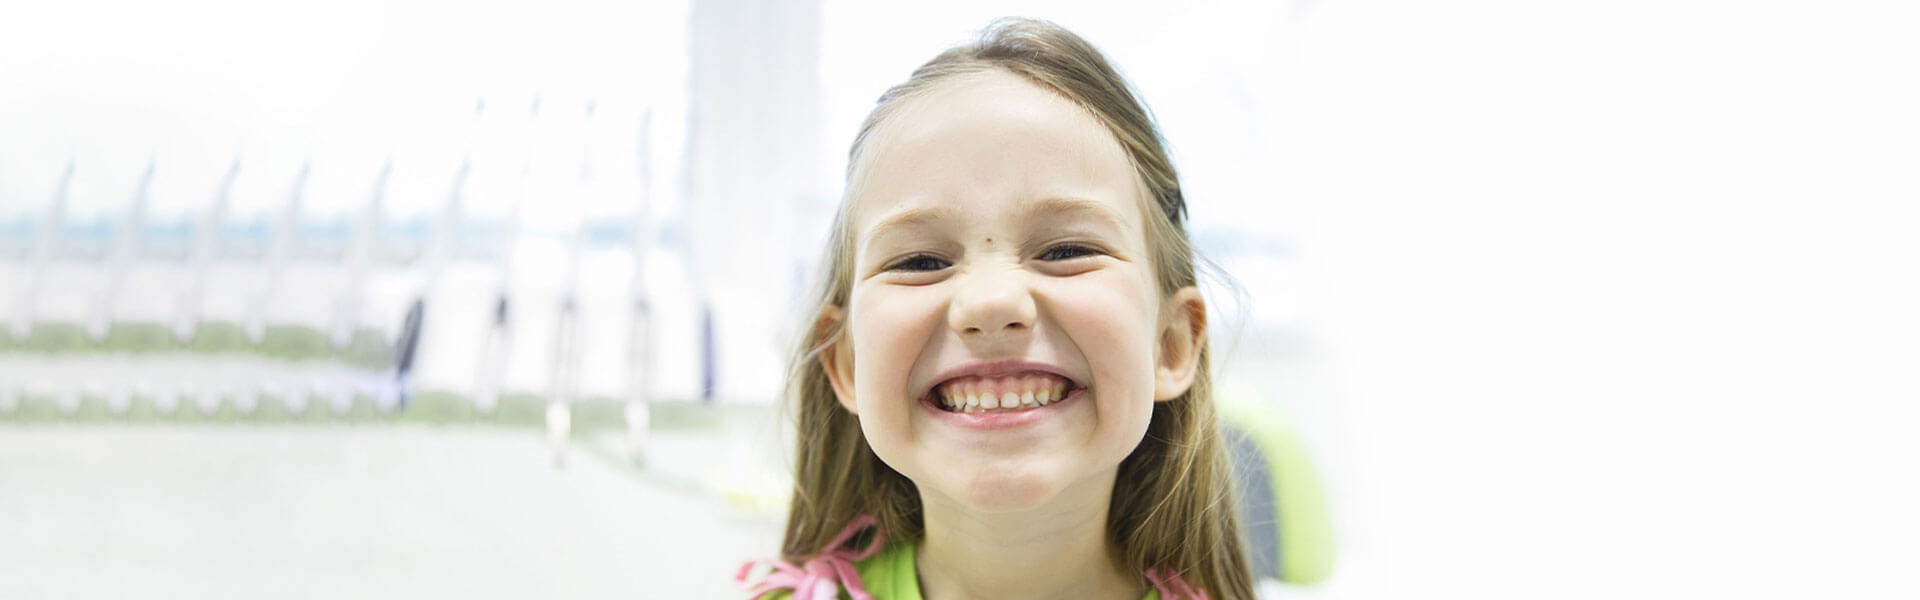 7 Tips for Choosing a Pediatric Dentist For Your Child This Christmas